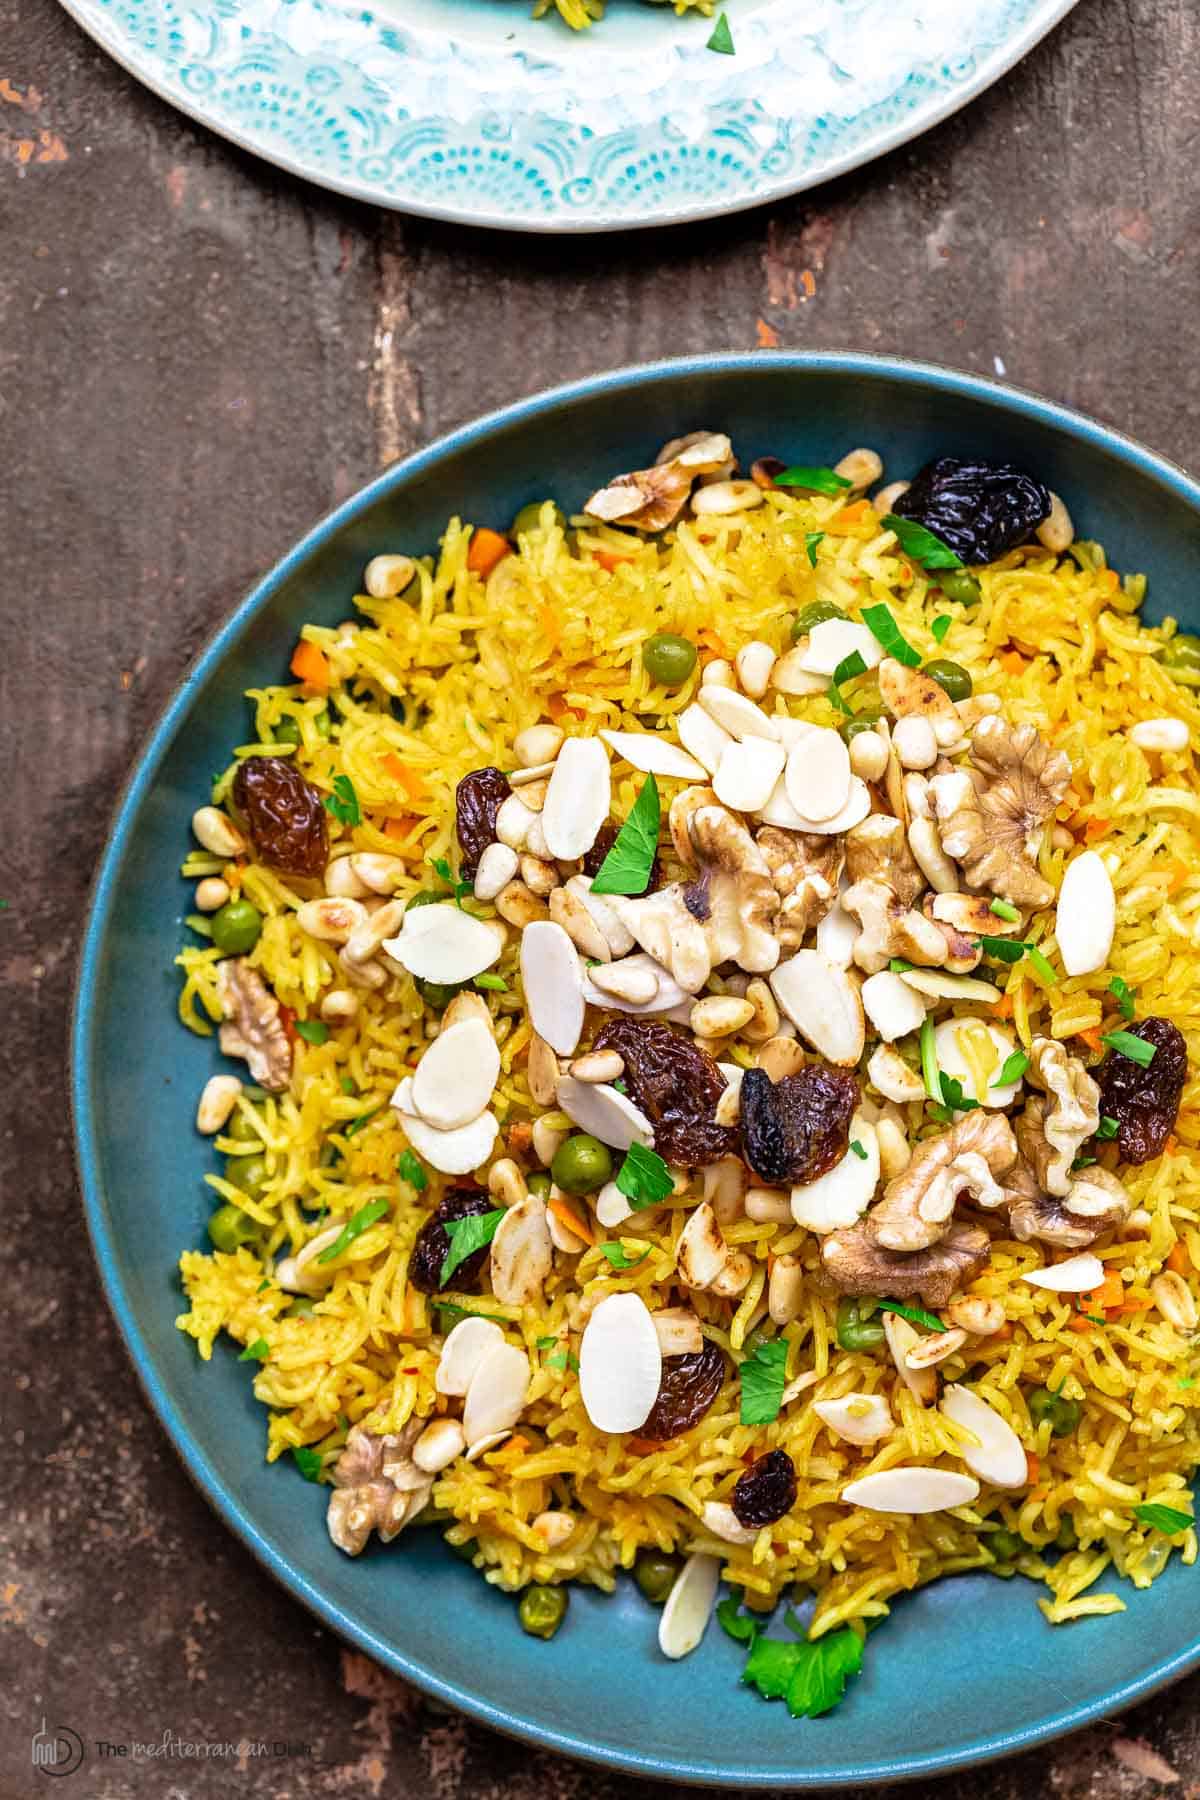 Basmati rice pilaf with dried fruit and toasted nuts